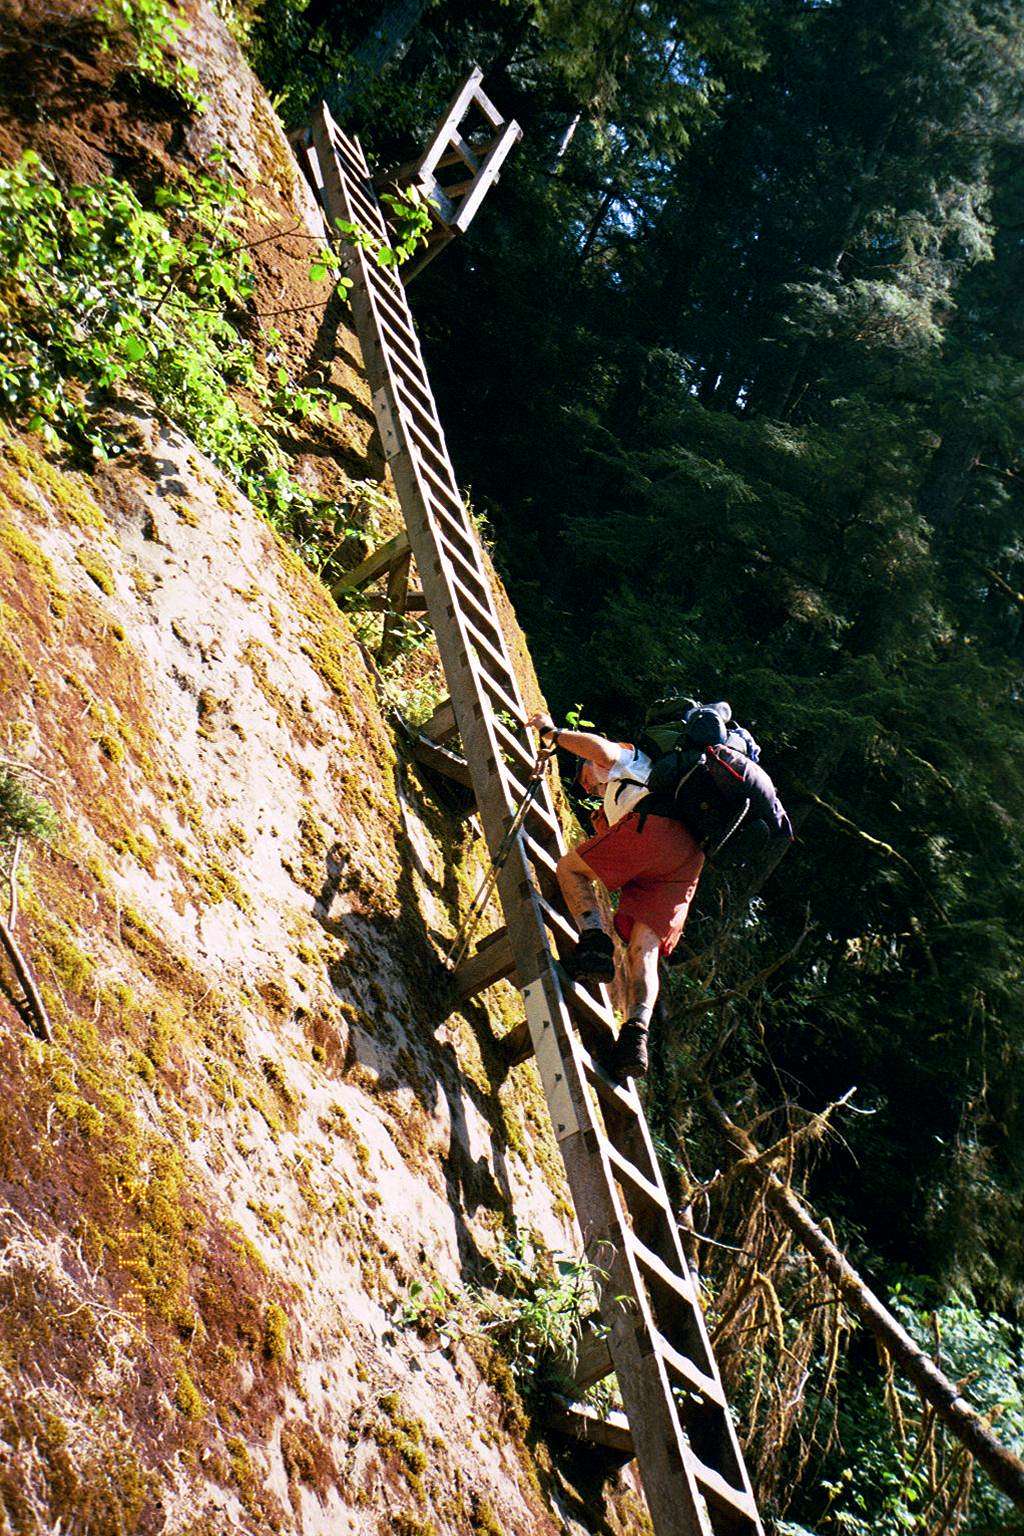 Steepest ladder on the trail